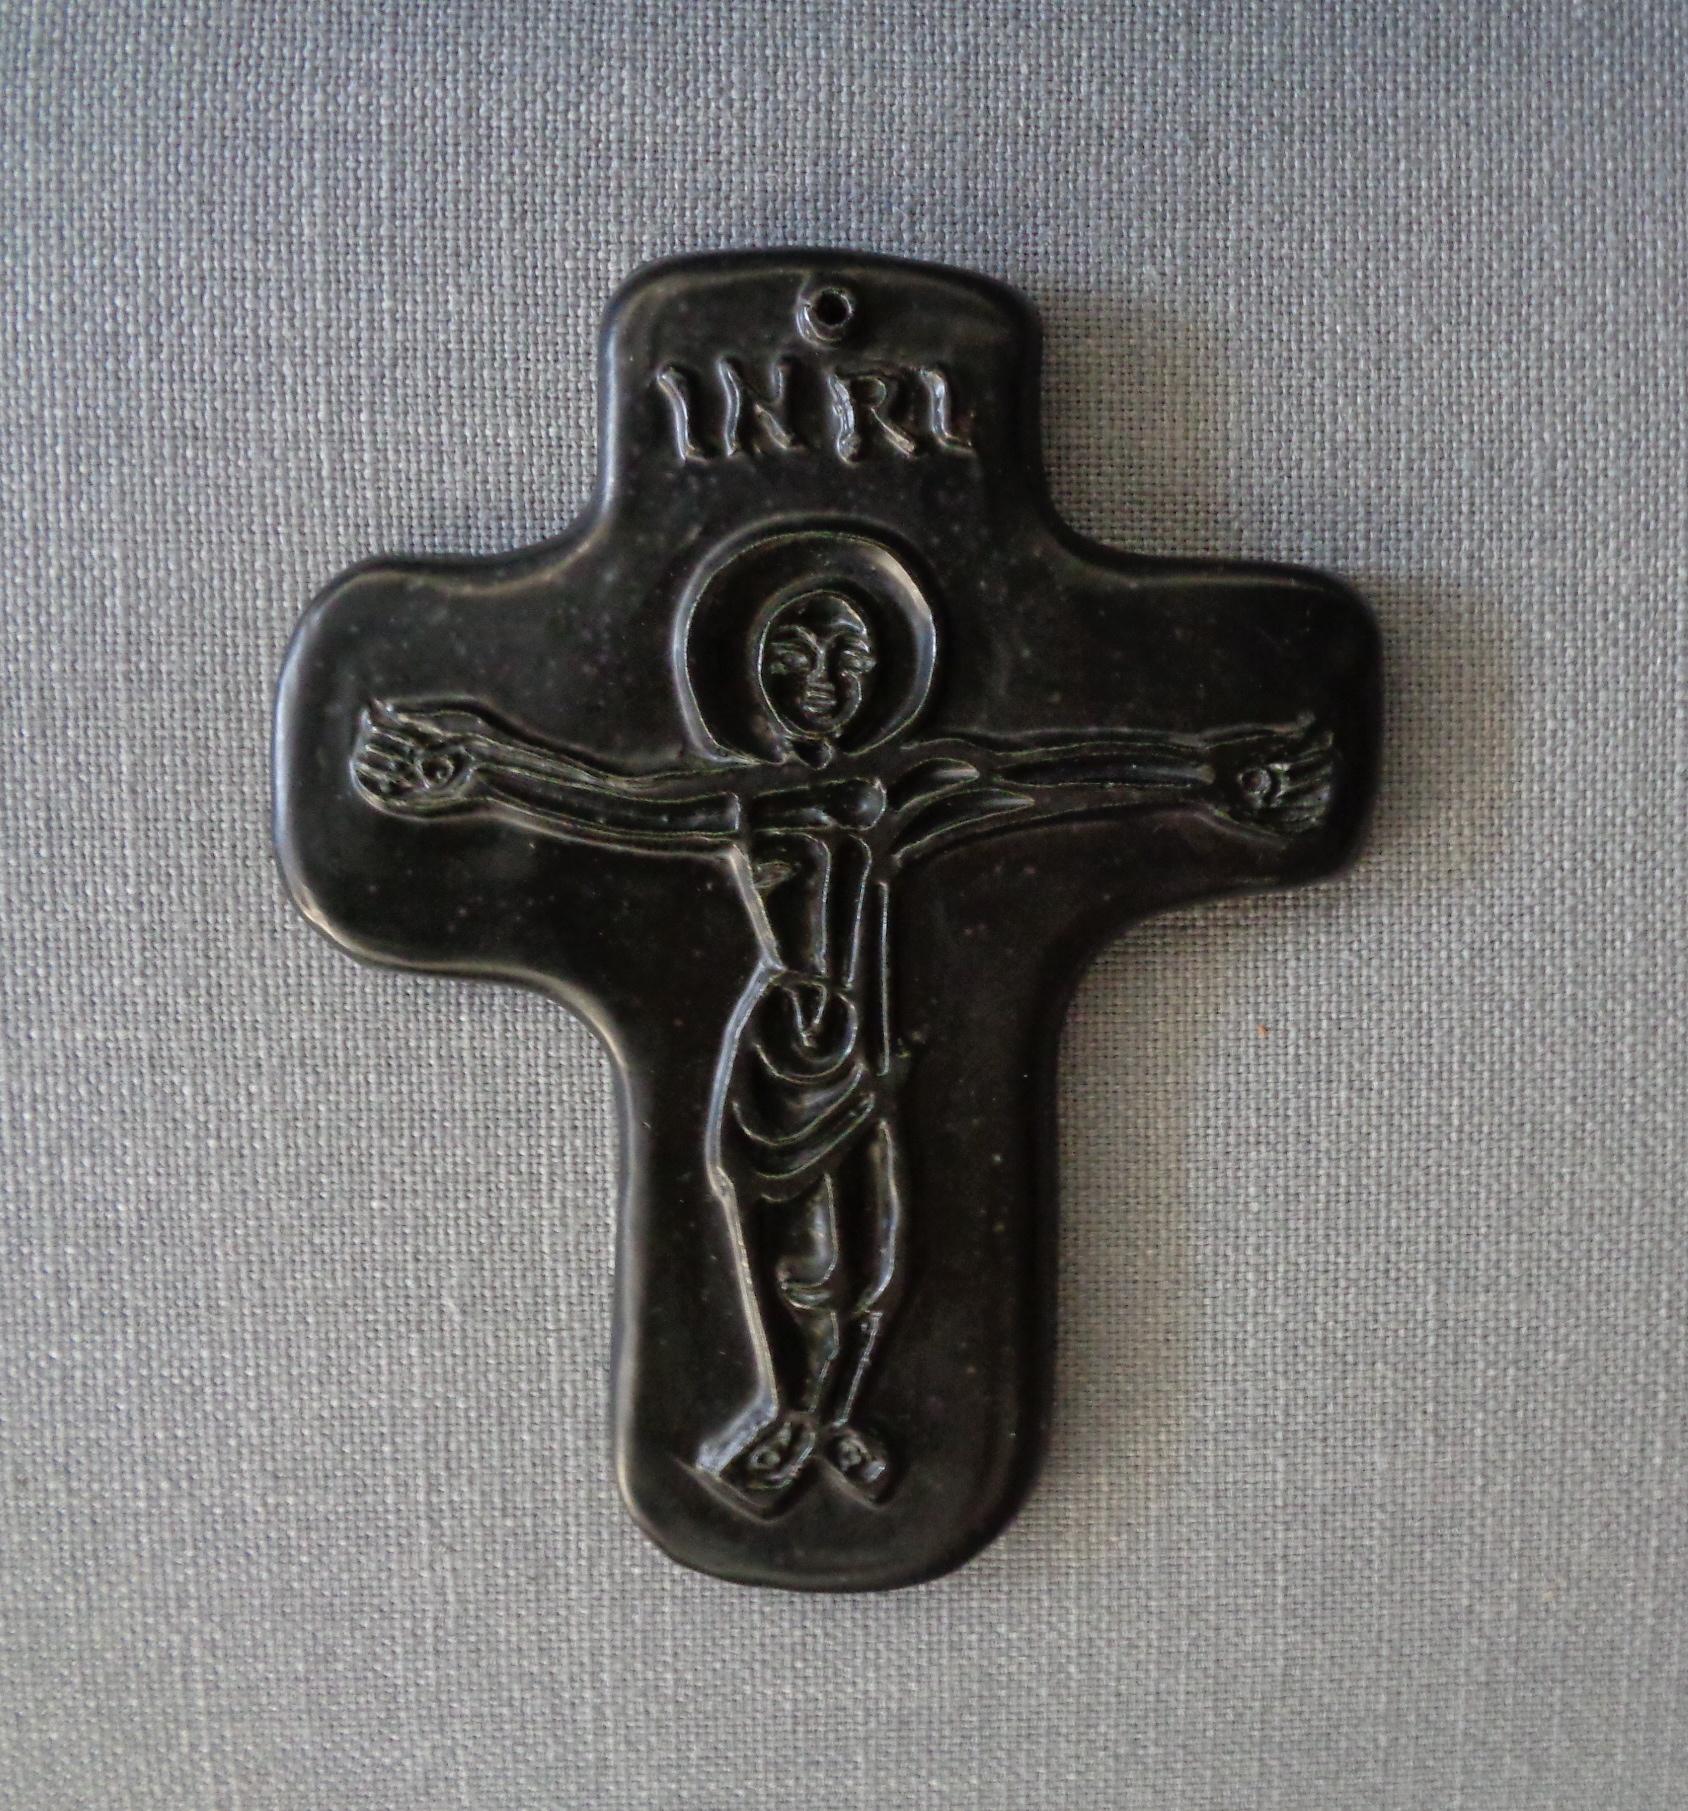 Made between 1942 and 1944, this crucifix is a very early piece from one of France's greatest ceramists. In 1942, Jouve had just escaped from Nazi imprisonment, and was hiding out in Provence, in an old potter's village. This was a ceramics-making